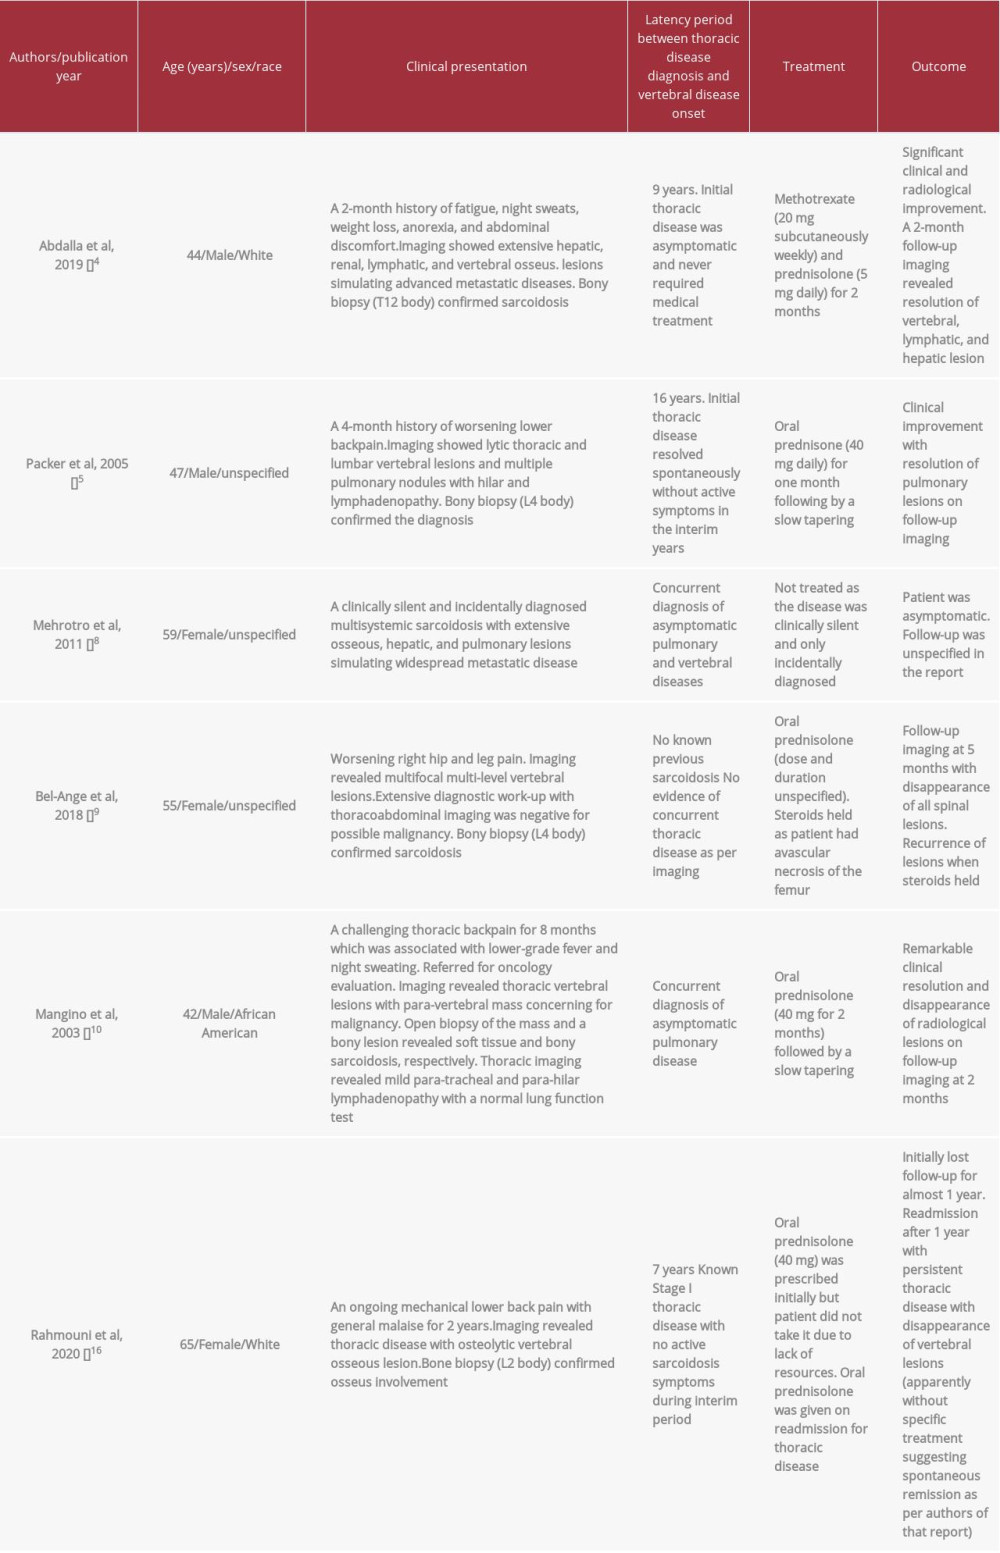 Summary of patient characteristics and clinical features of cases of multisystemic sarcoidosis with vertebral osseous disease in the literature.